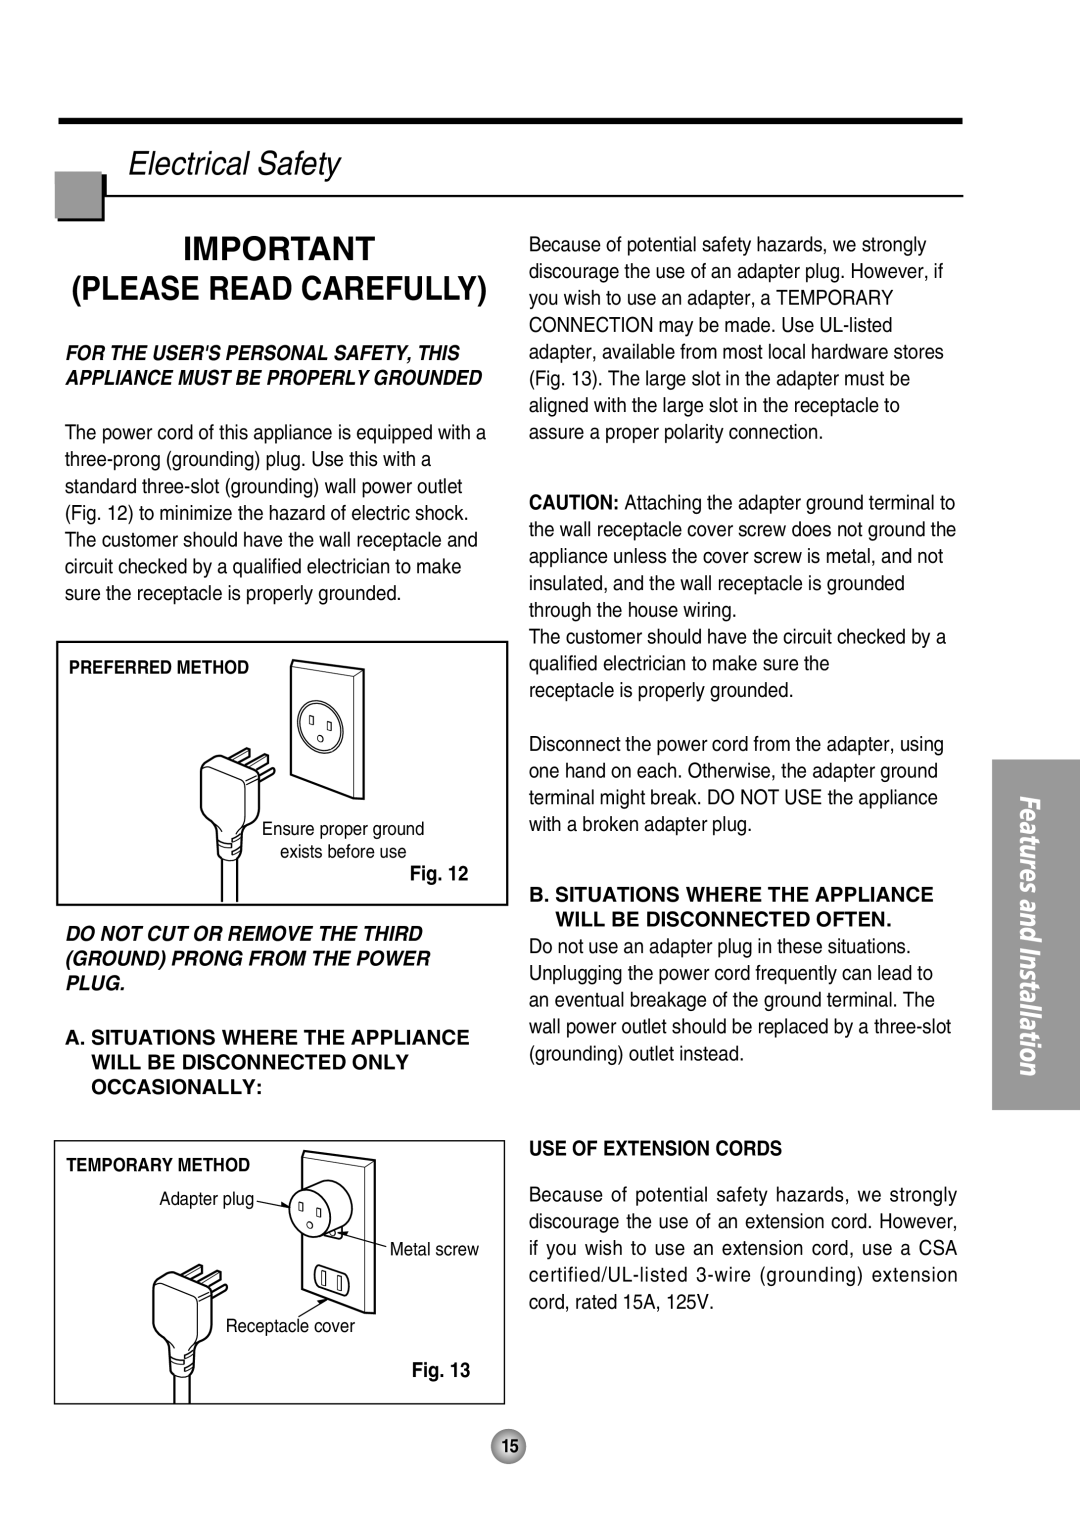 Panasonic CW-XC80HU Electrical Safety, Please Read Carefully, B. Situations Where The Appliance Will Be Disconnected Often 